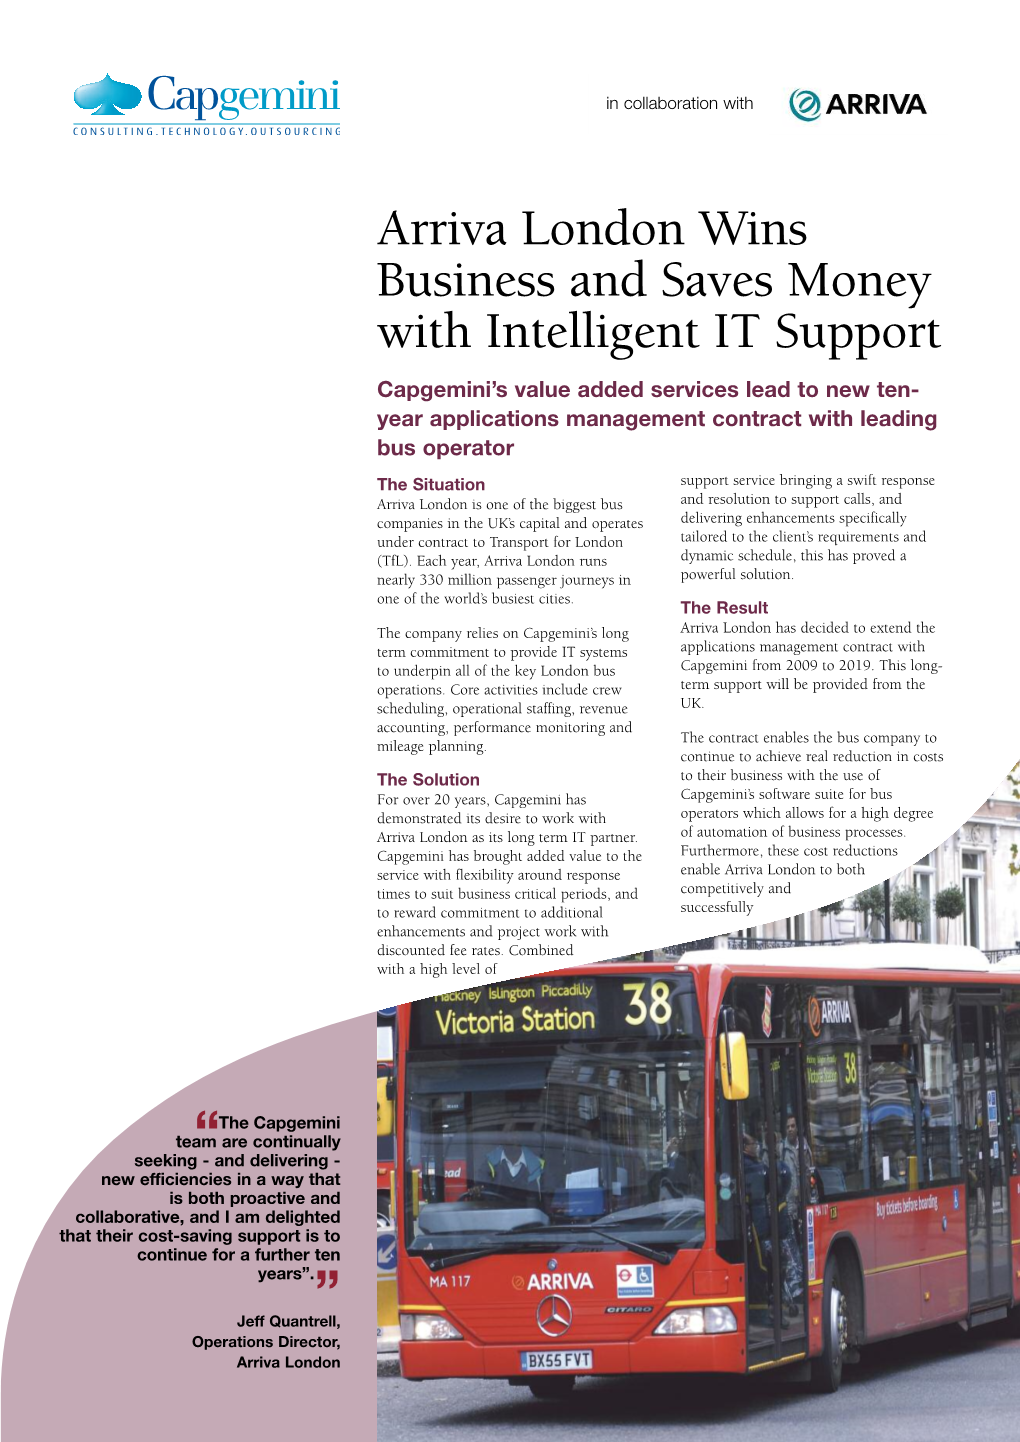 Arriva London Wins Business and Saves Money with Intelligent IT